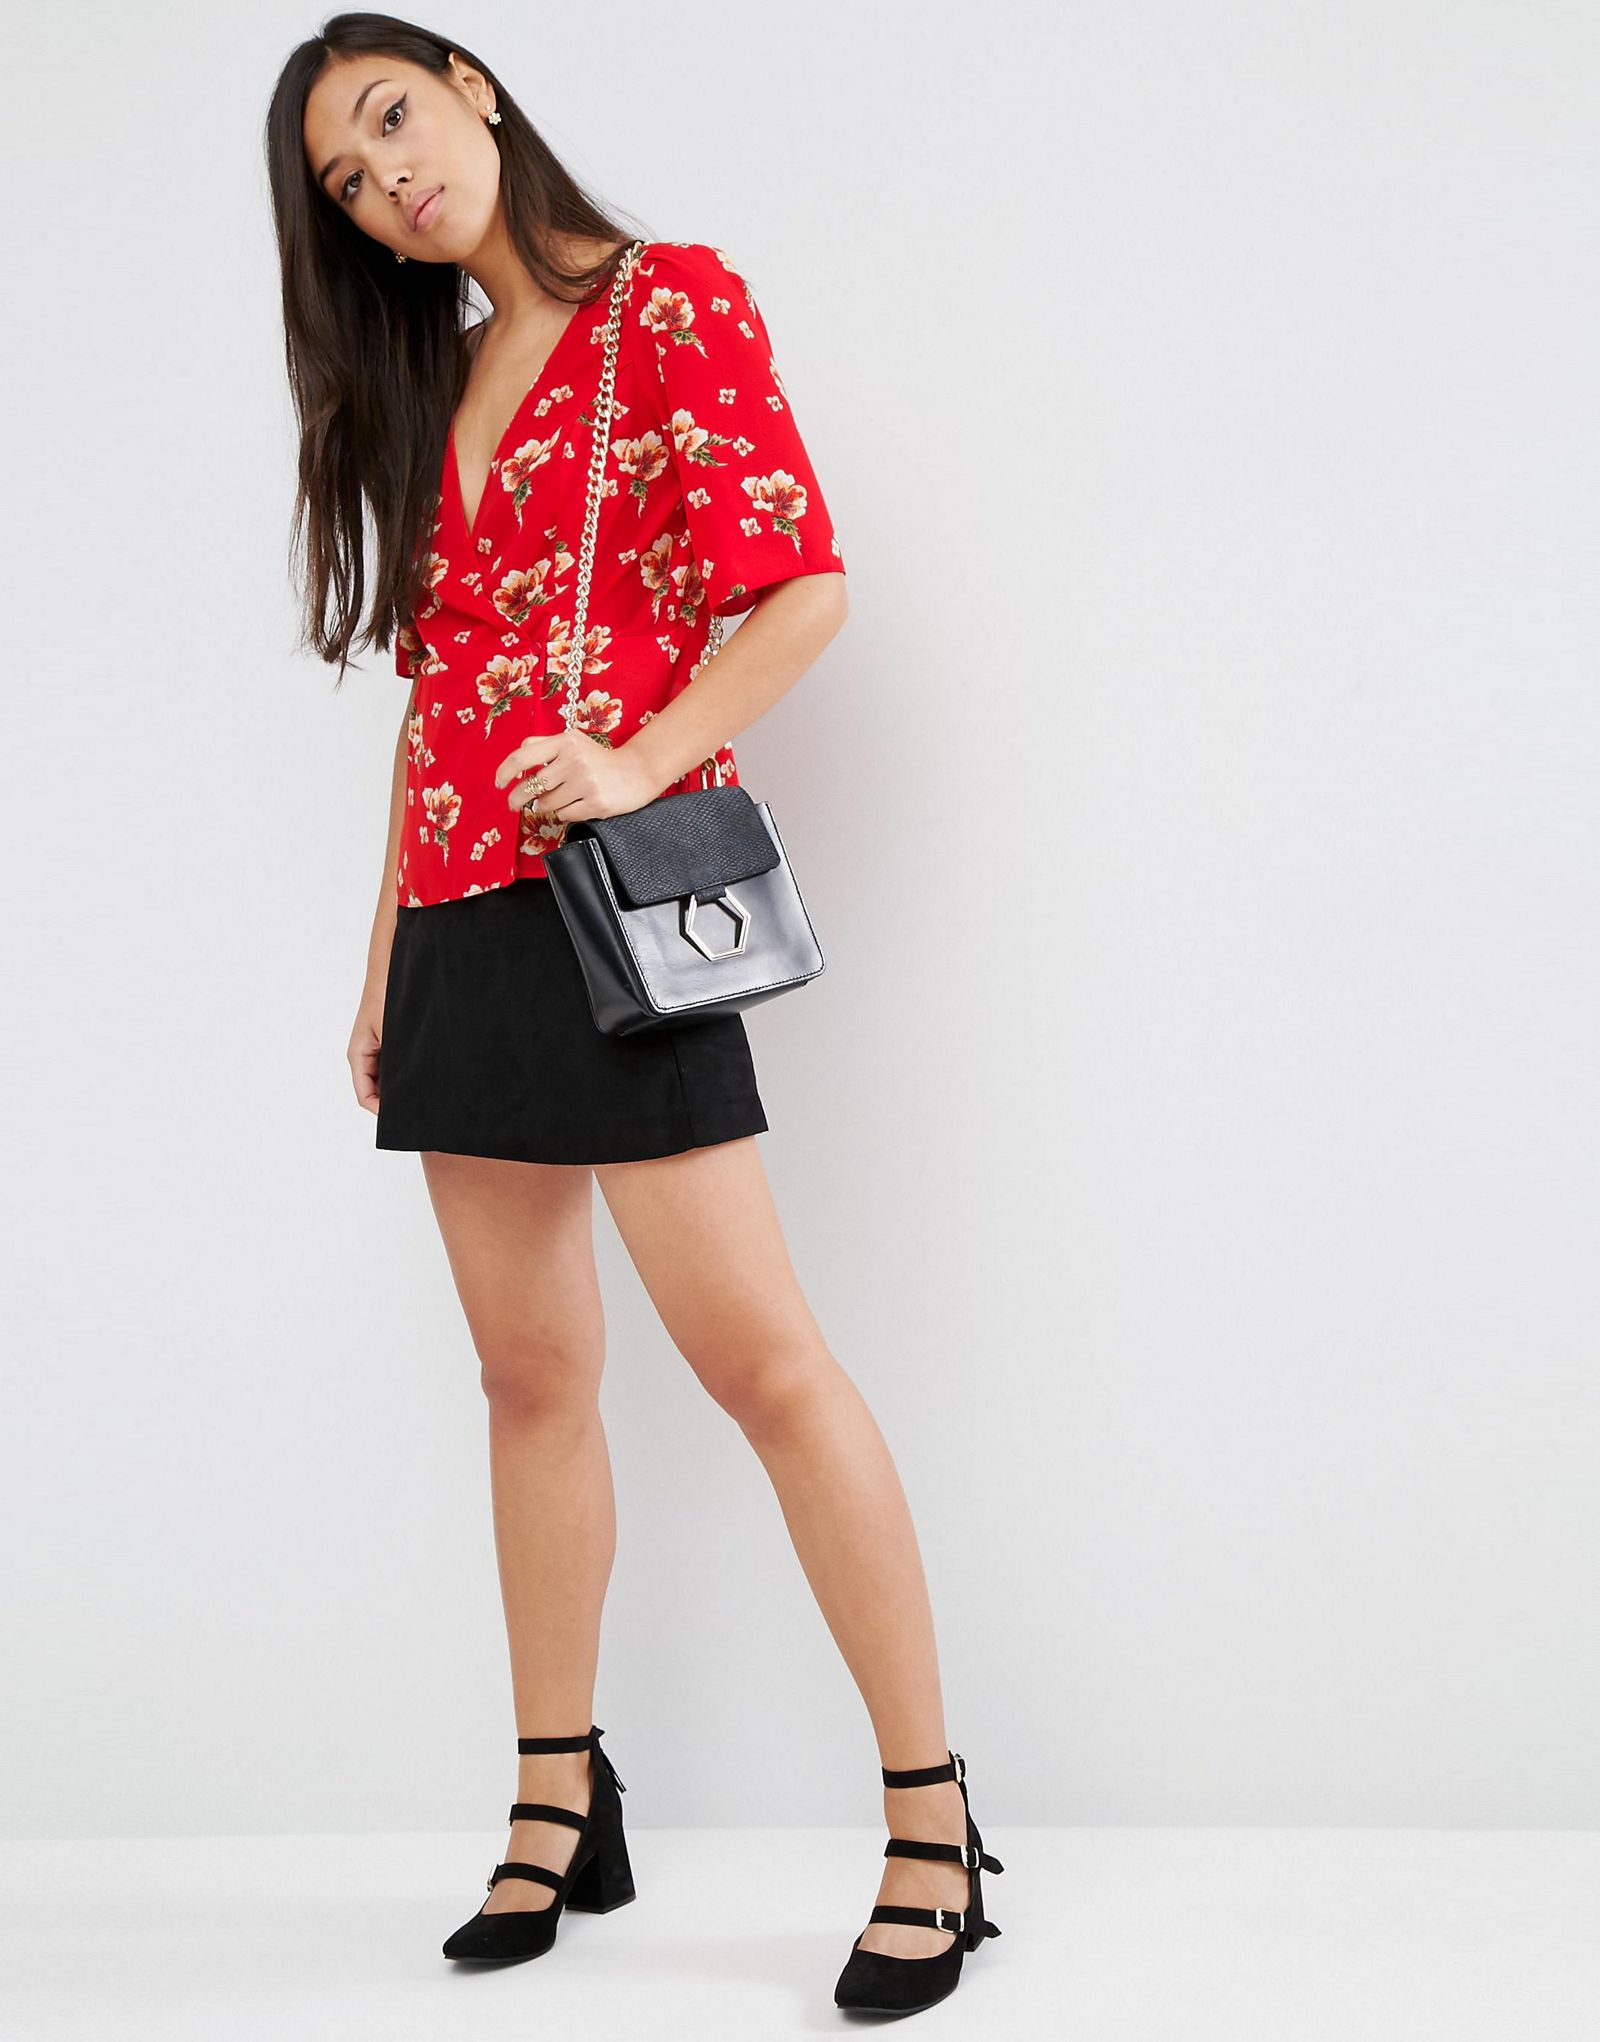 ASOS Wrap Tea Blouse in Red Floral Print